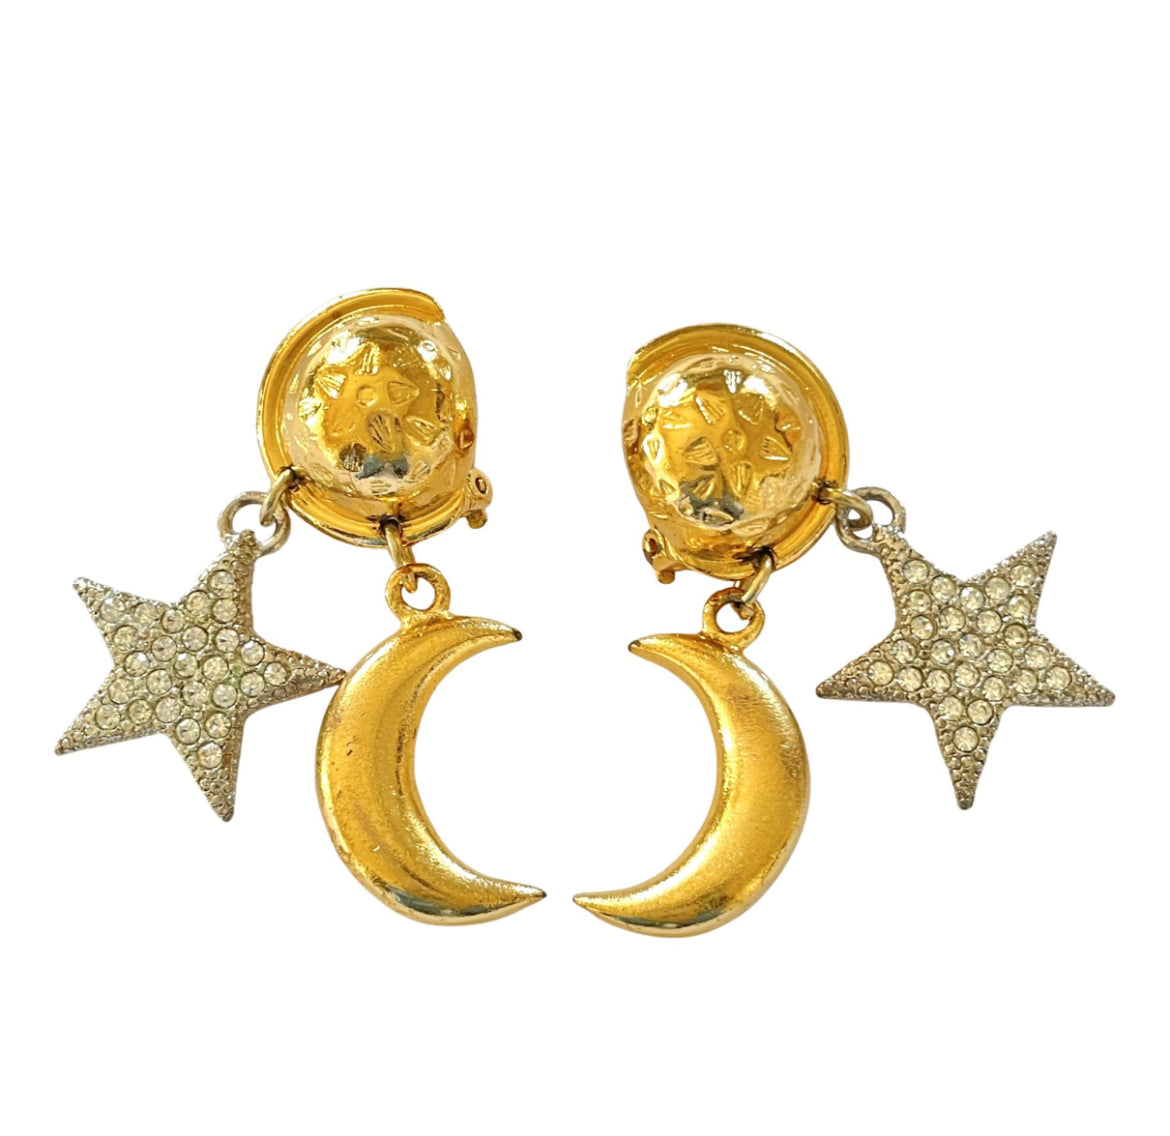 Celine Authenticated Gold Plated Earrings